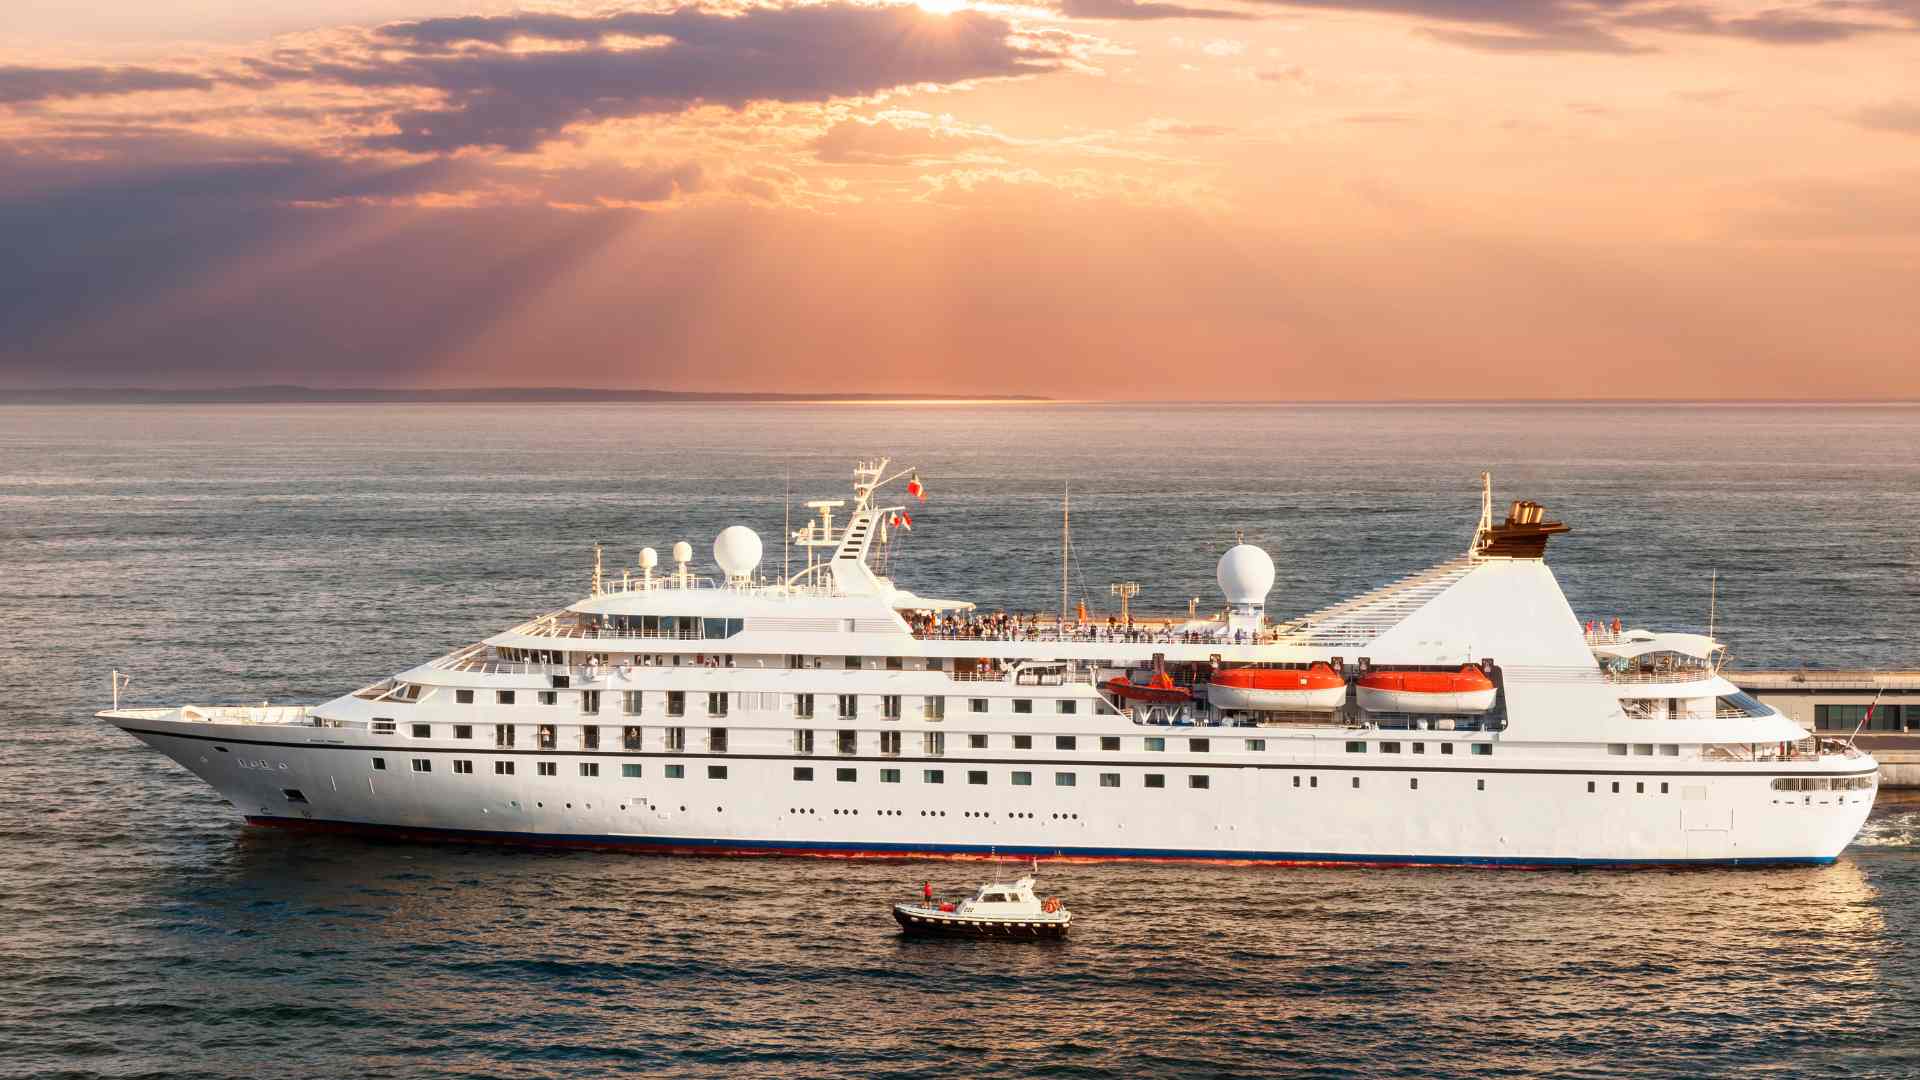 3-Day Cruise Without a Passport